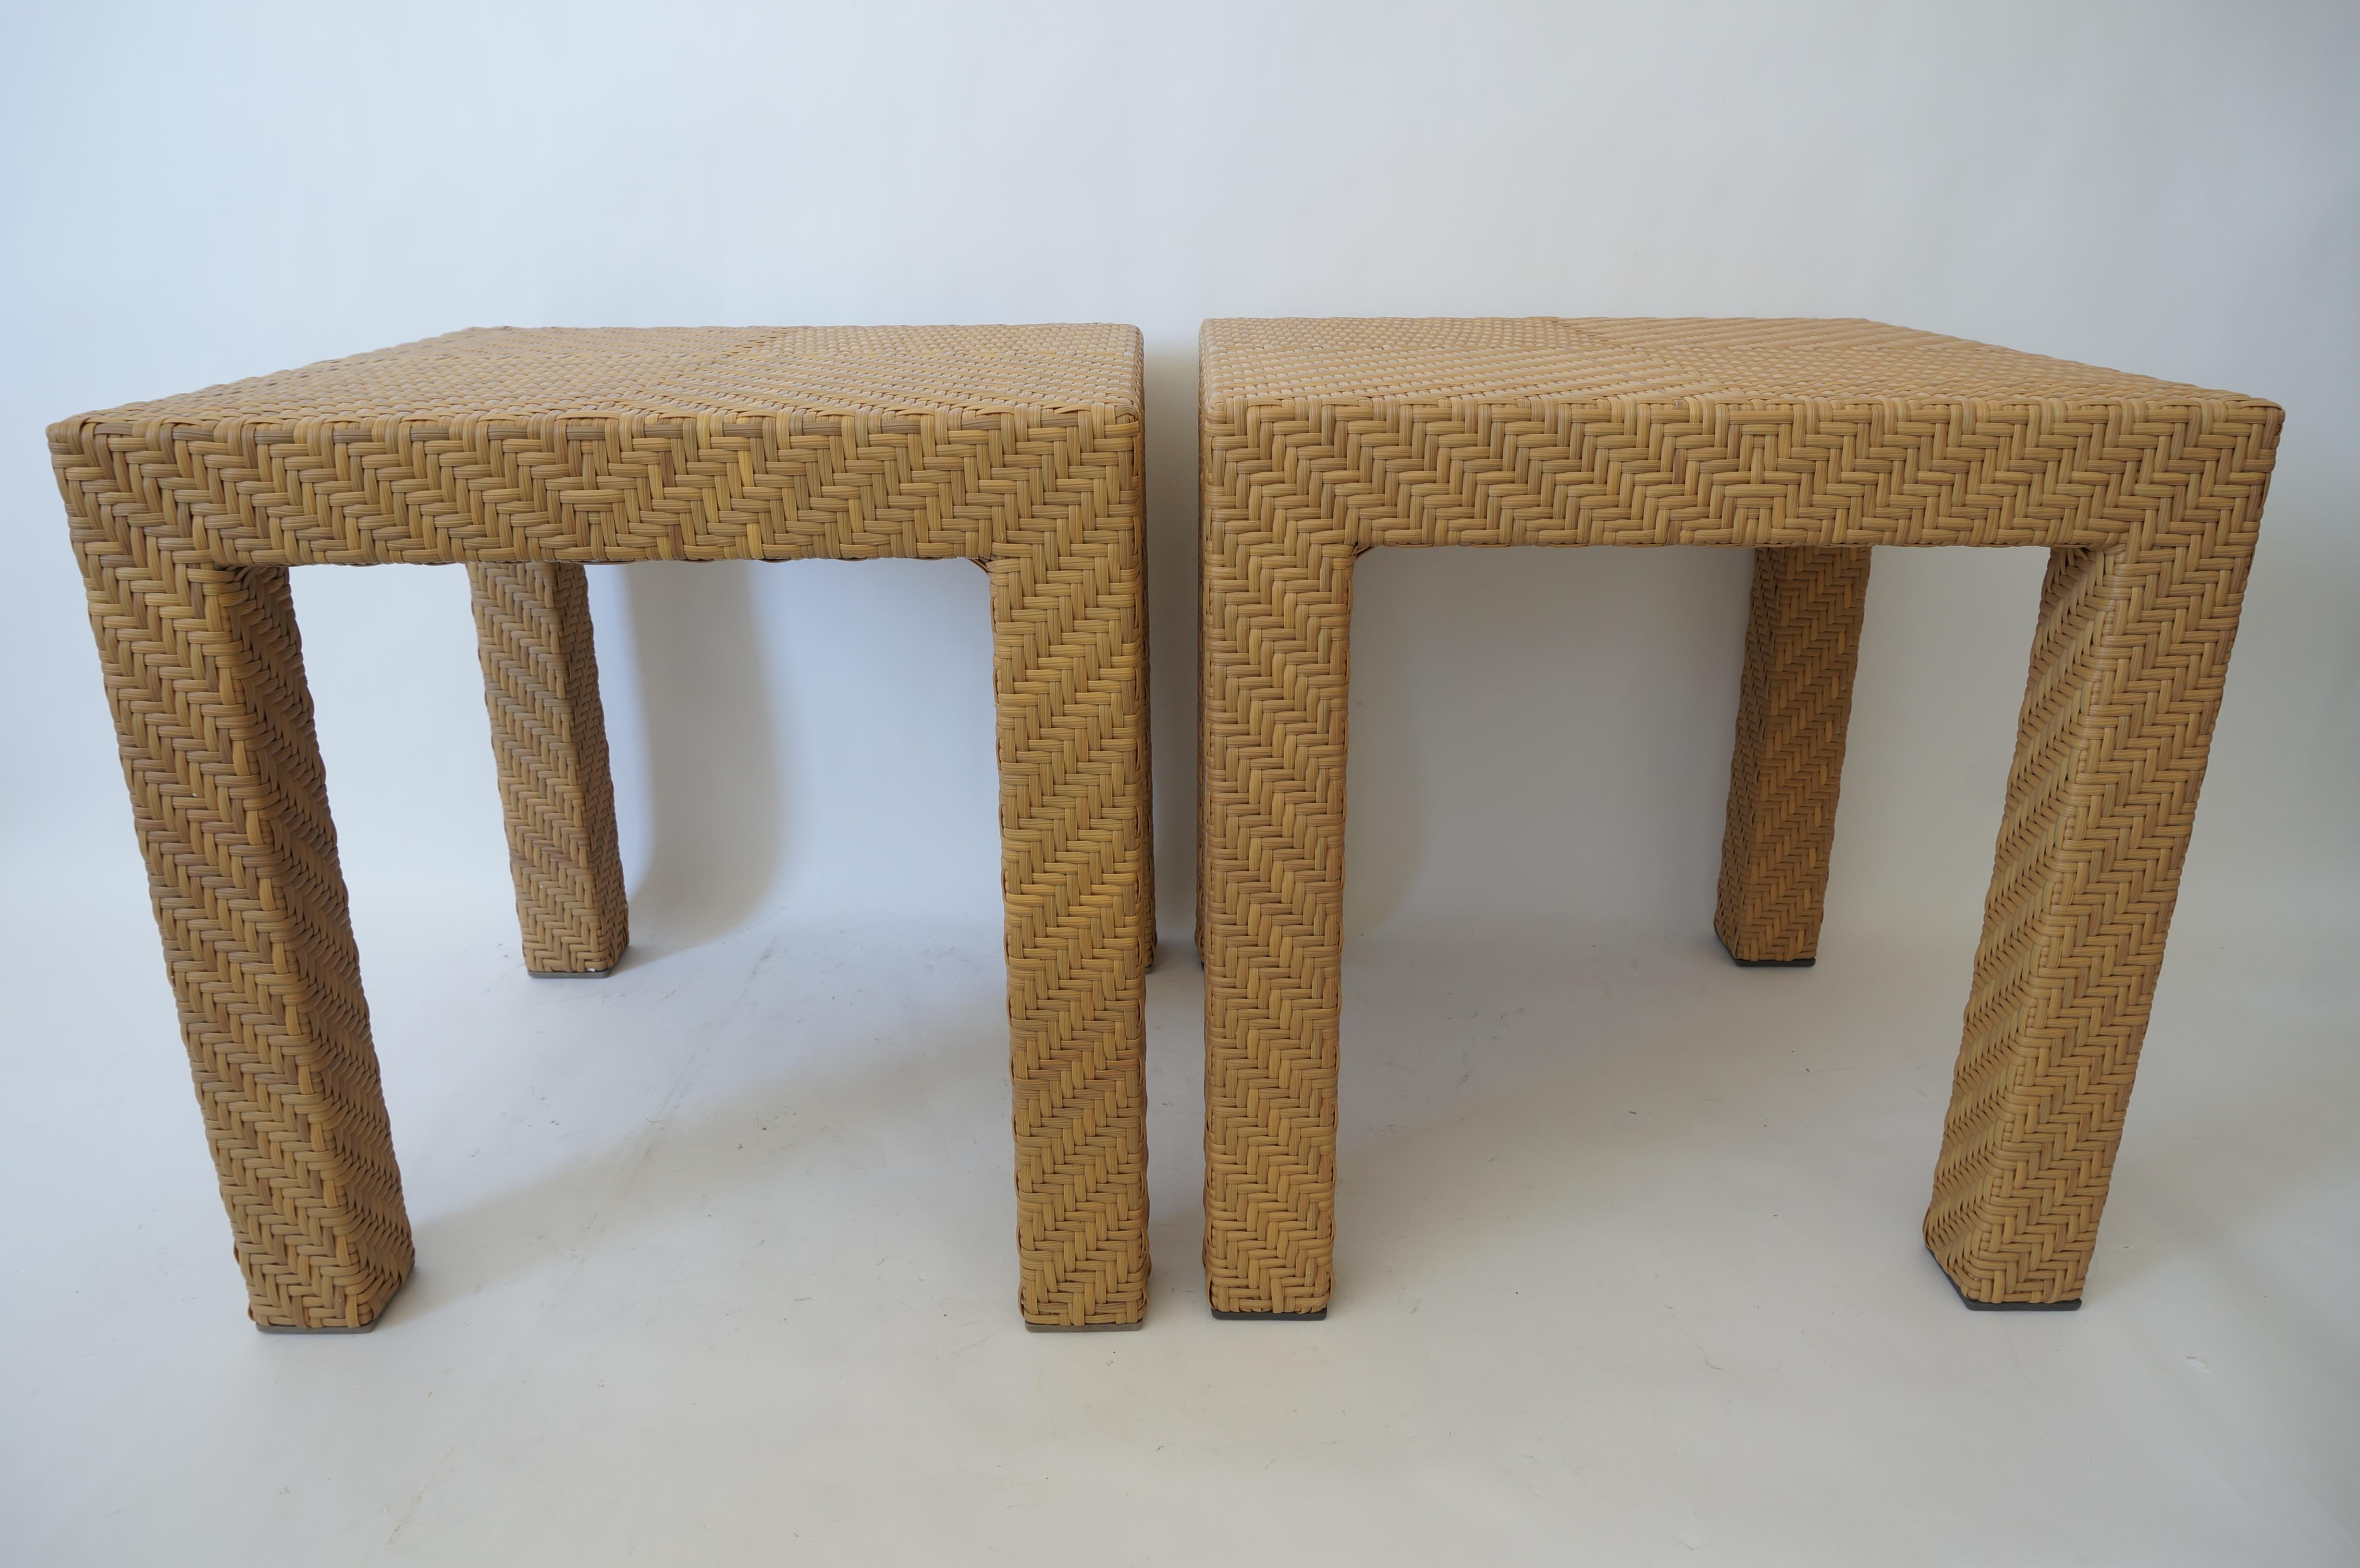 This stylish and chic pair of (synthetic) wicker, parsons style side tables were designed by Oscar De La Renta, and they will make the perfect tables for your cottage, bungalow or seaside retreat.